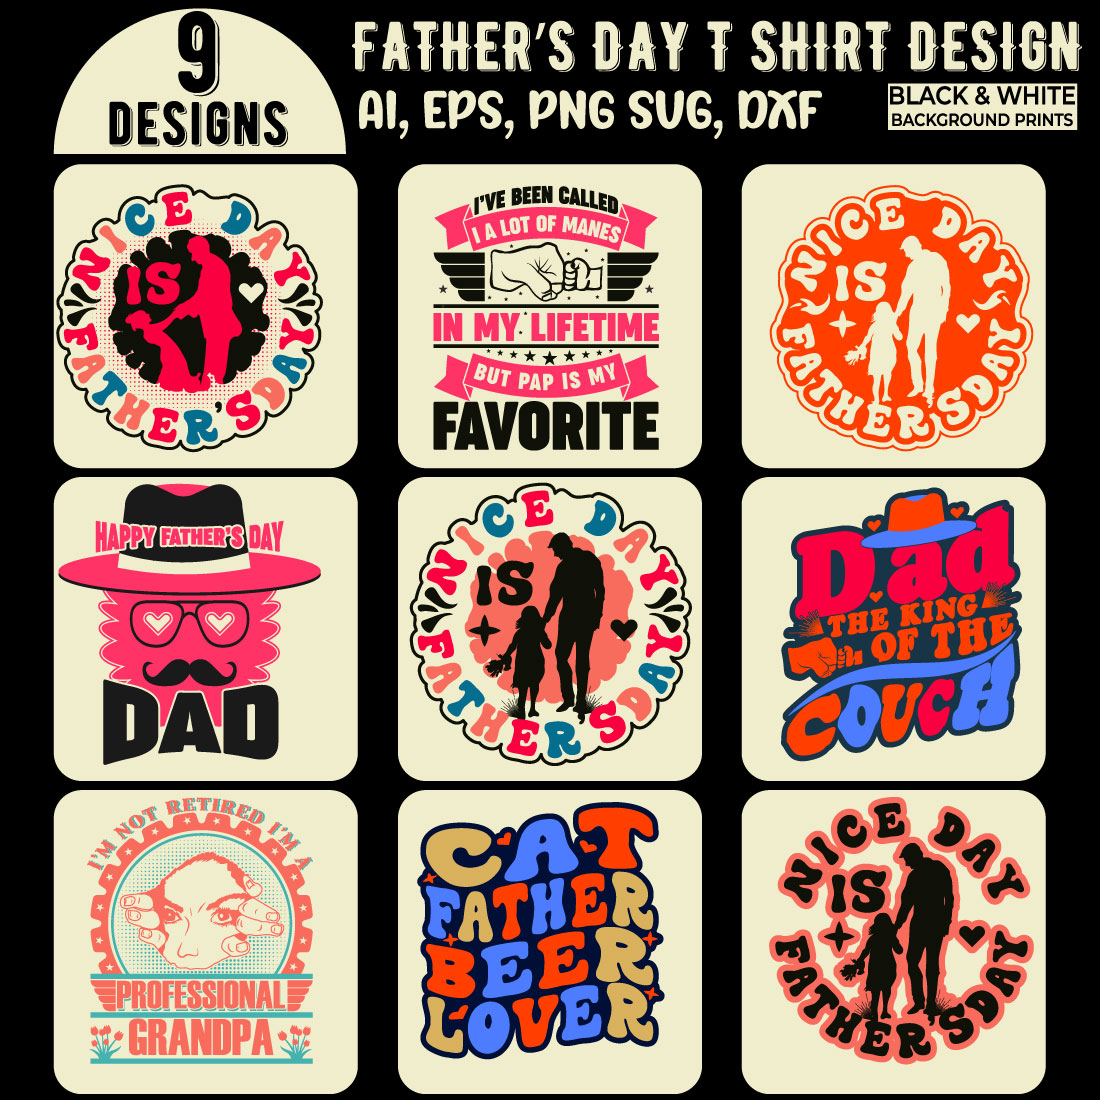 Father's day typography quote t shirt design-4 preview image.